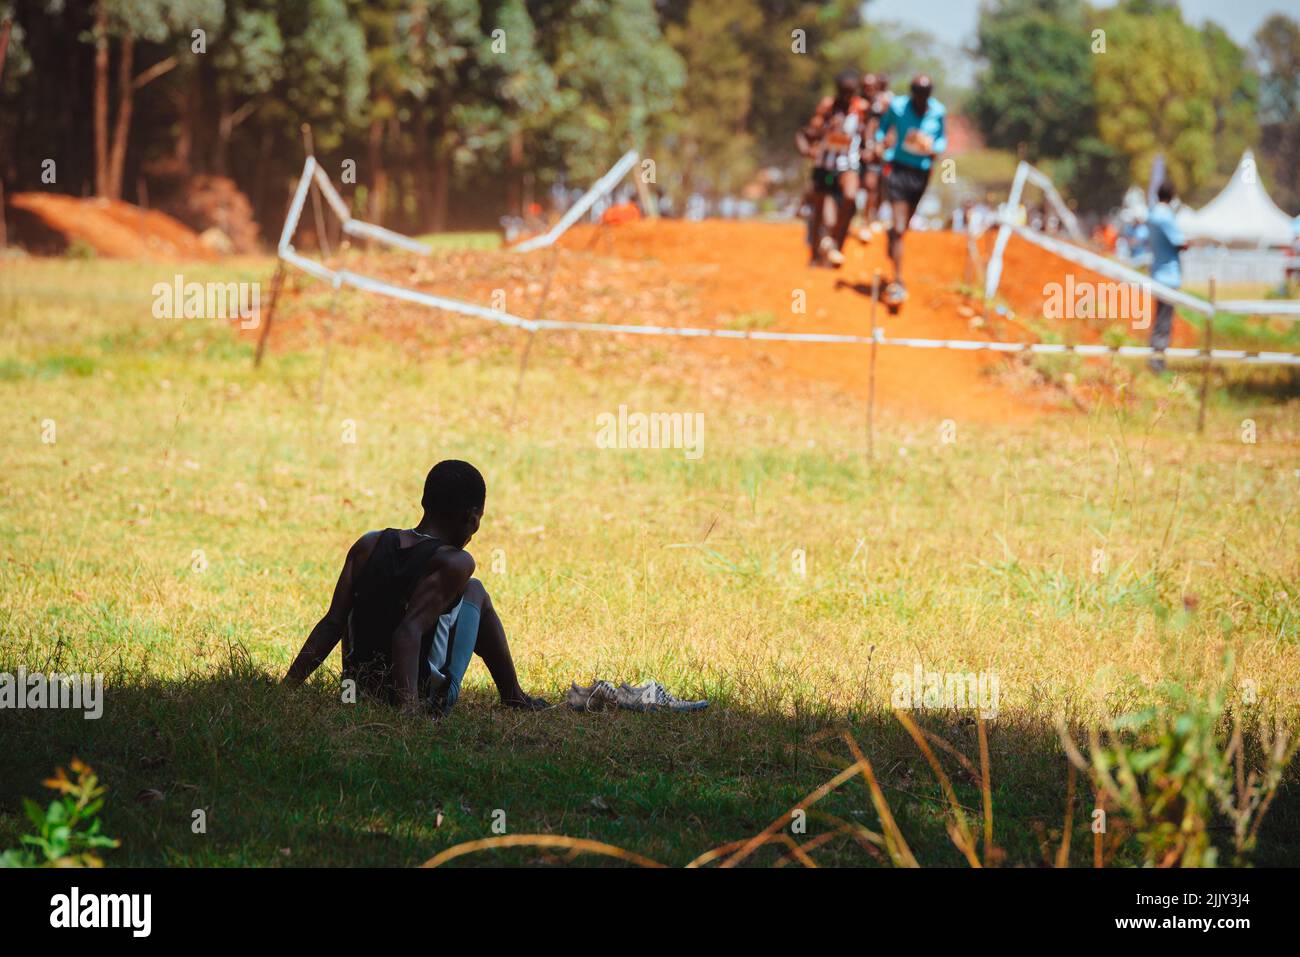 The runner withdrew from the race. He has given up and is not continuing his run. Stock Photo